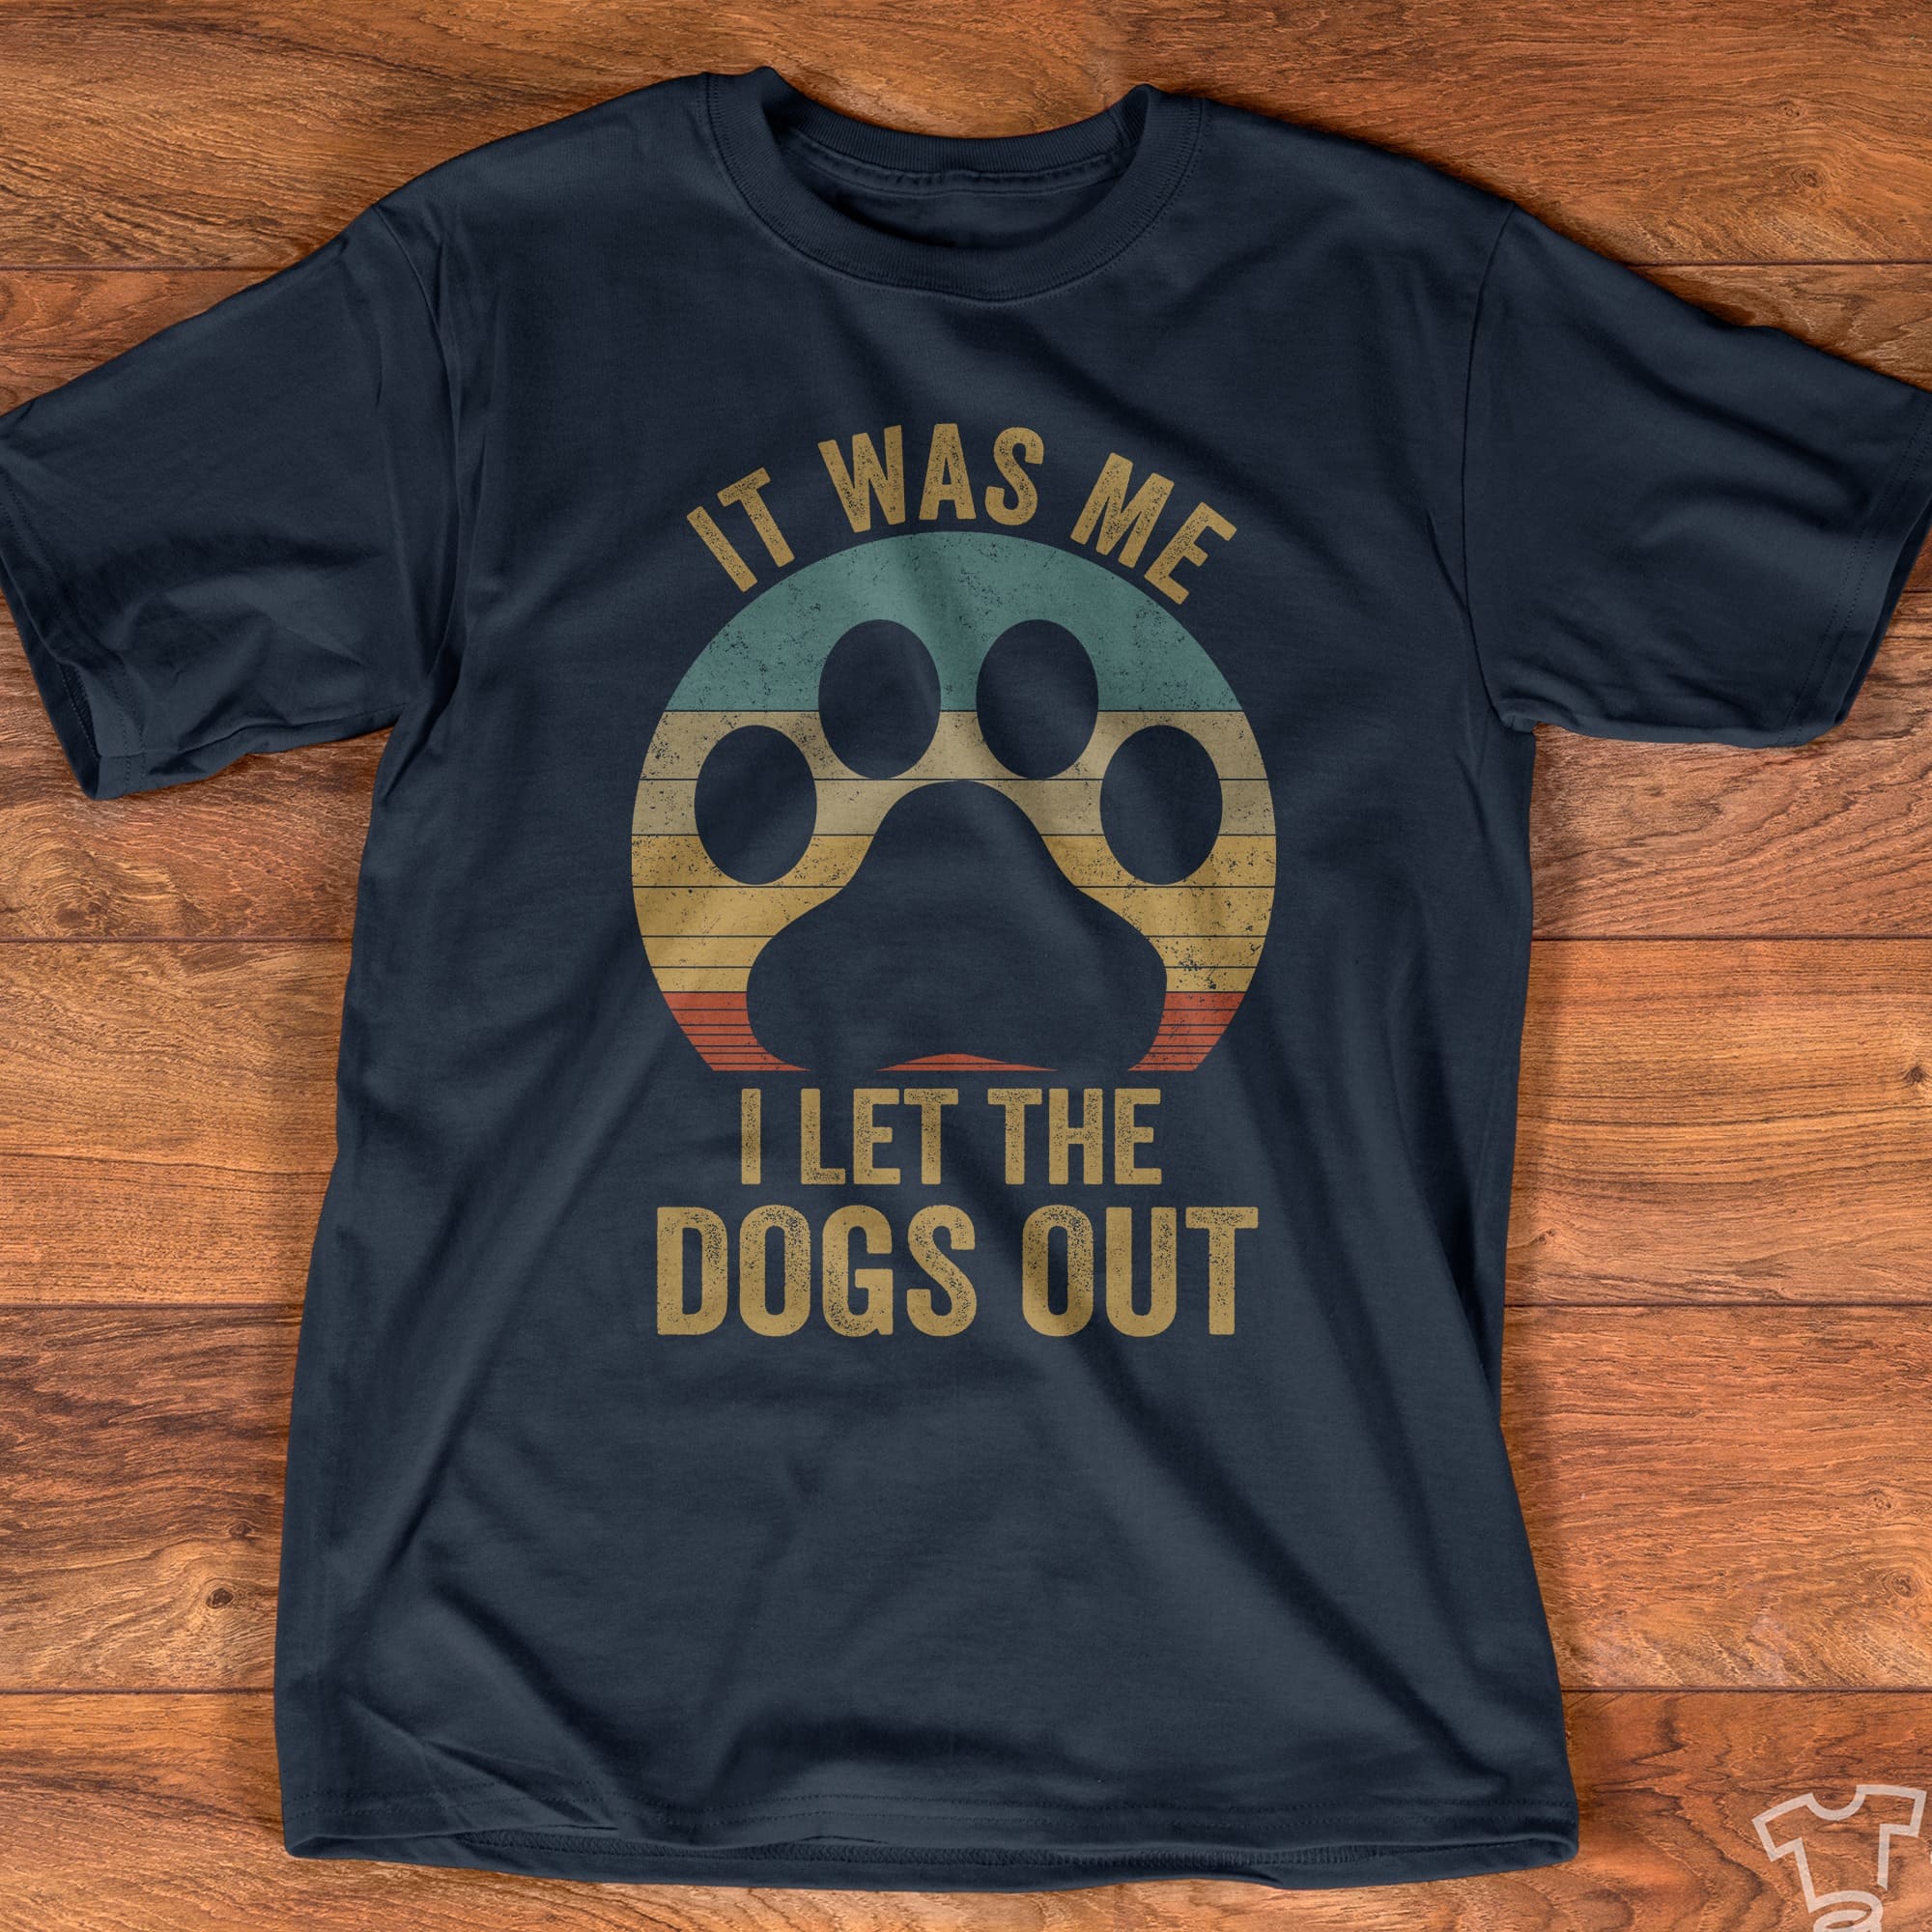 It was me I let the dogs out - Dog rescueing, dog footprint